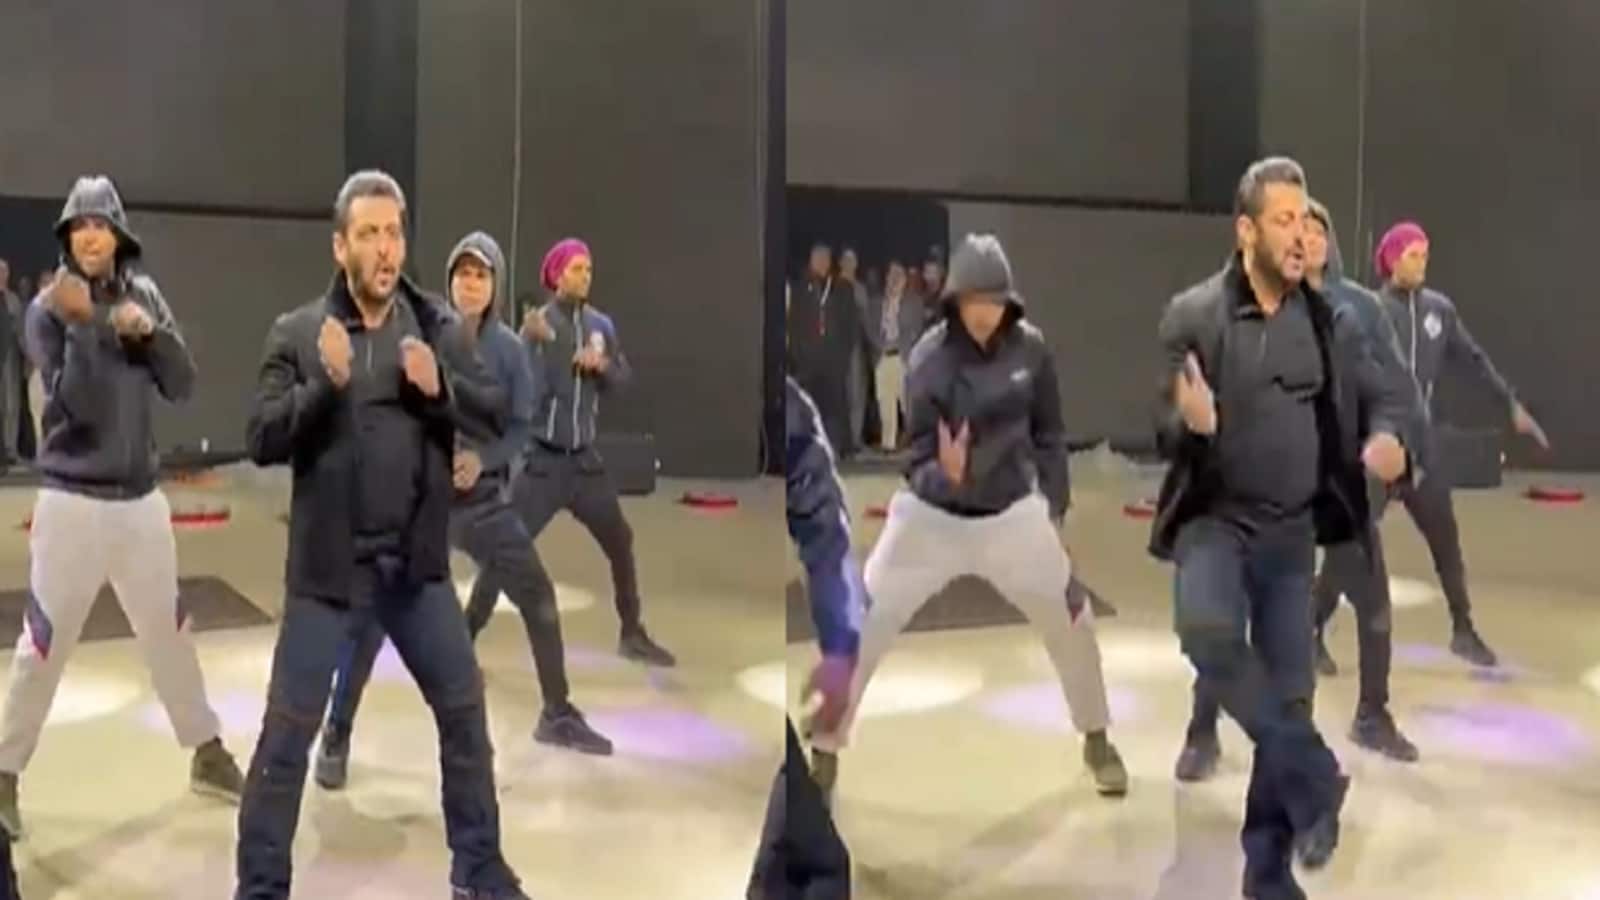 Salman Khan gets fat-shamed, massively trolled for his bloating tummy as he  rehearses for a dance performance